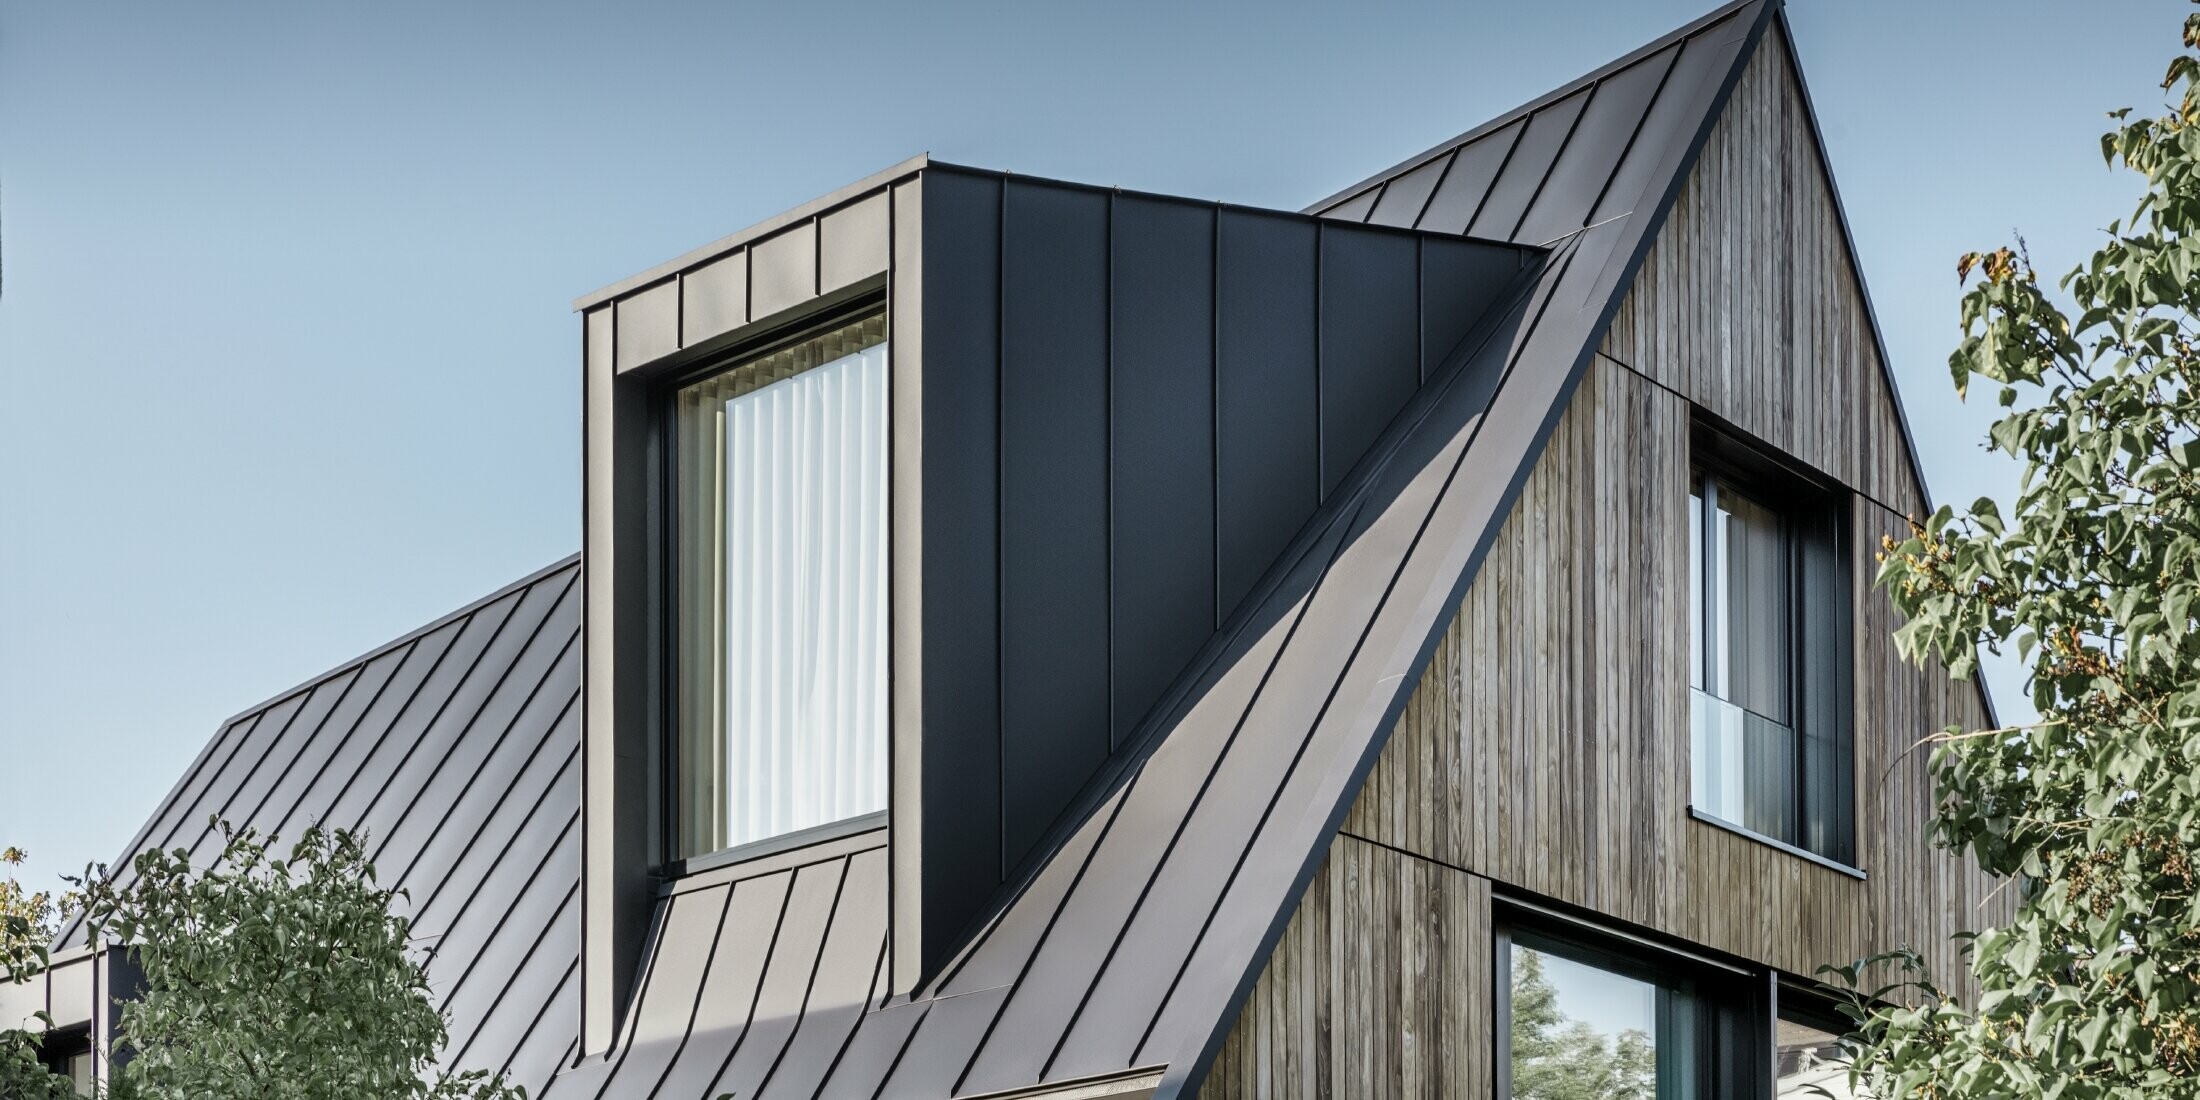 Steep gable roof with large dormer, covered with PREFALZ by PREFA in anthracite standing seam roof combined with wooden façade